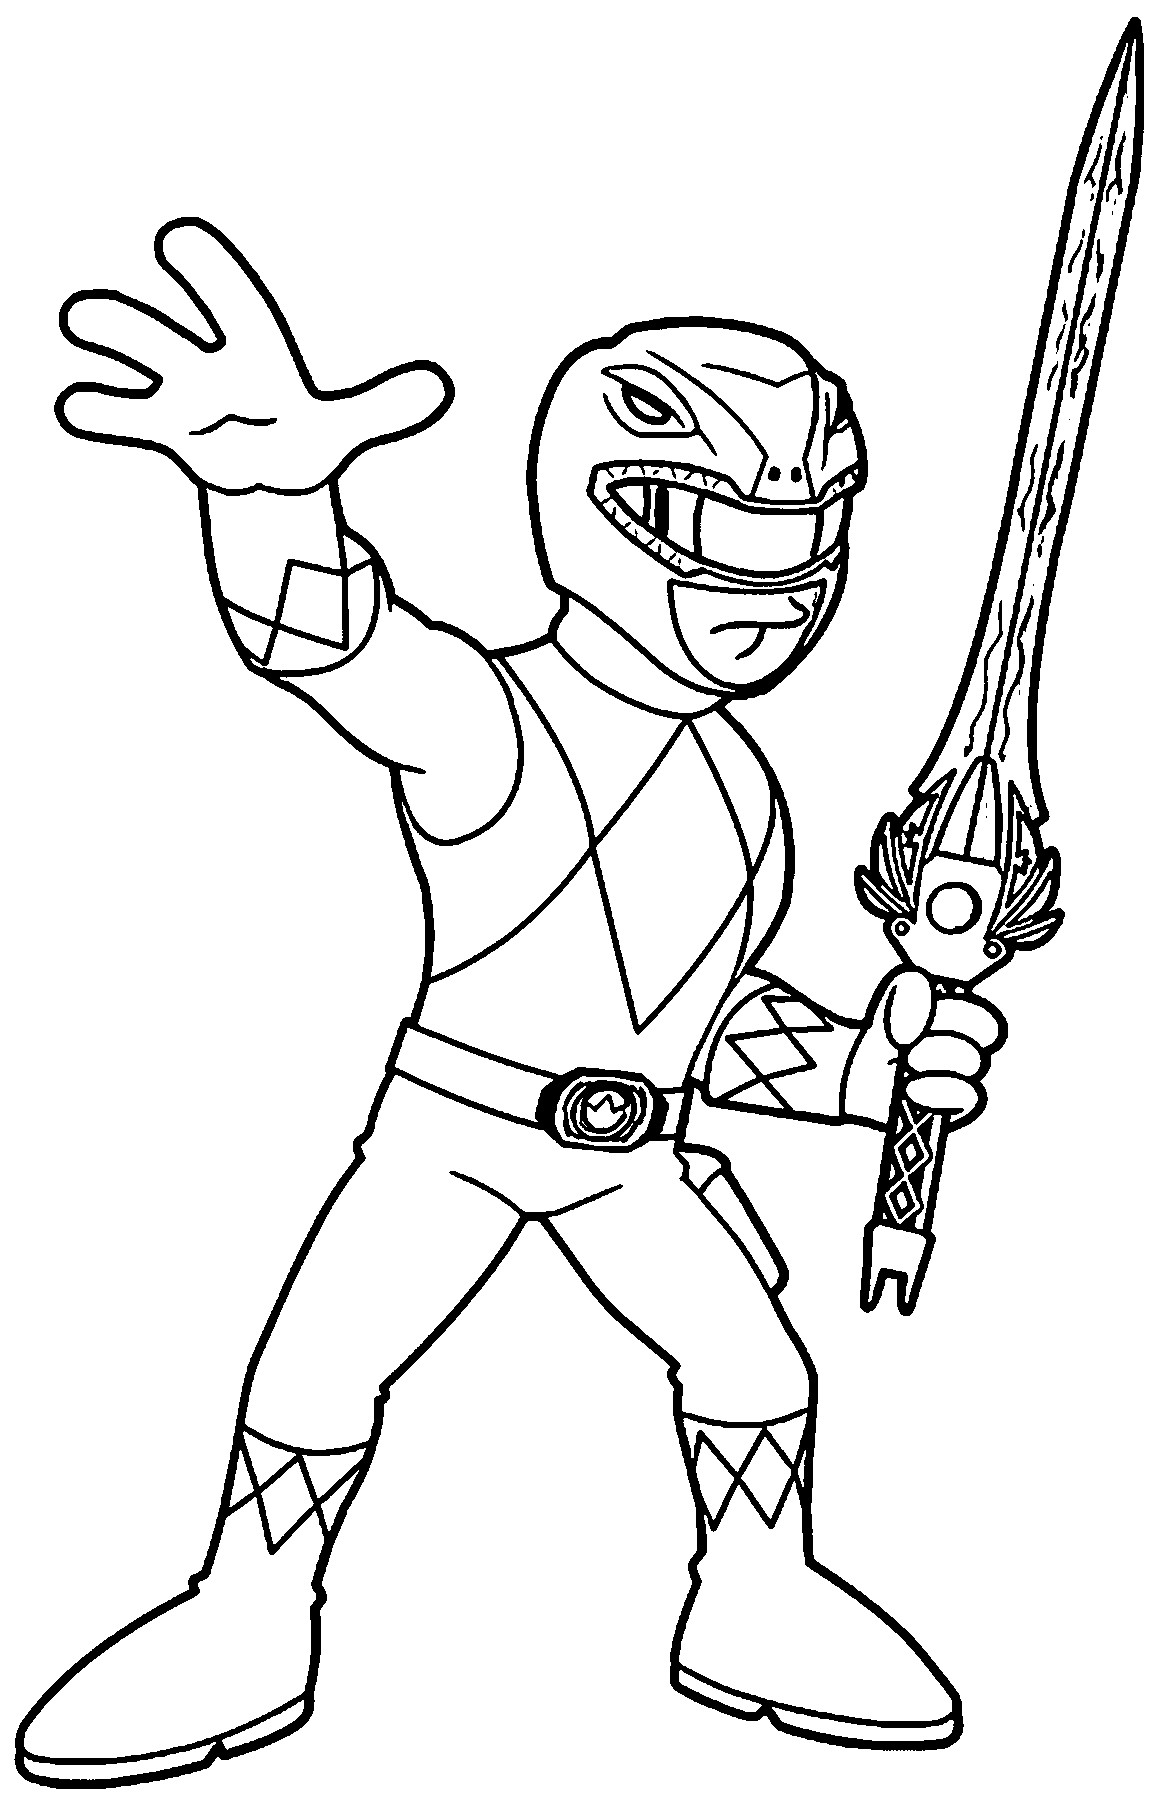 Power Ranger Coloring Pages
 Mighty Morphin Power Ranger Coloring Pages Download